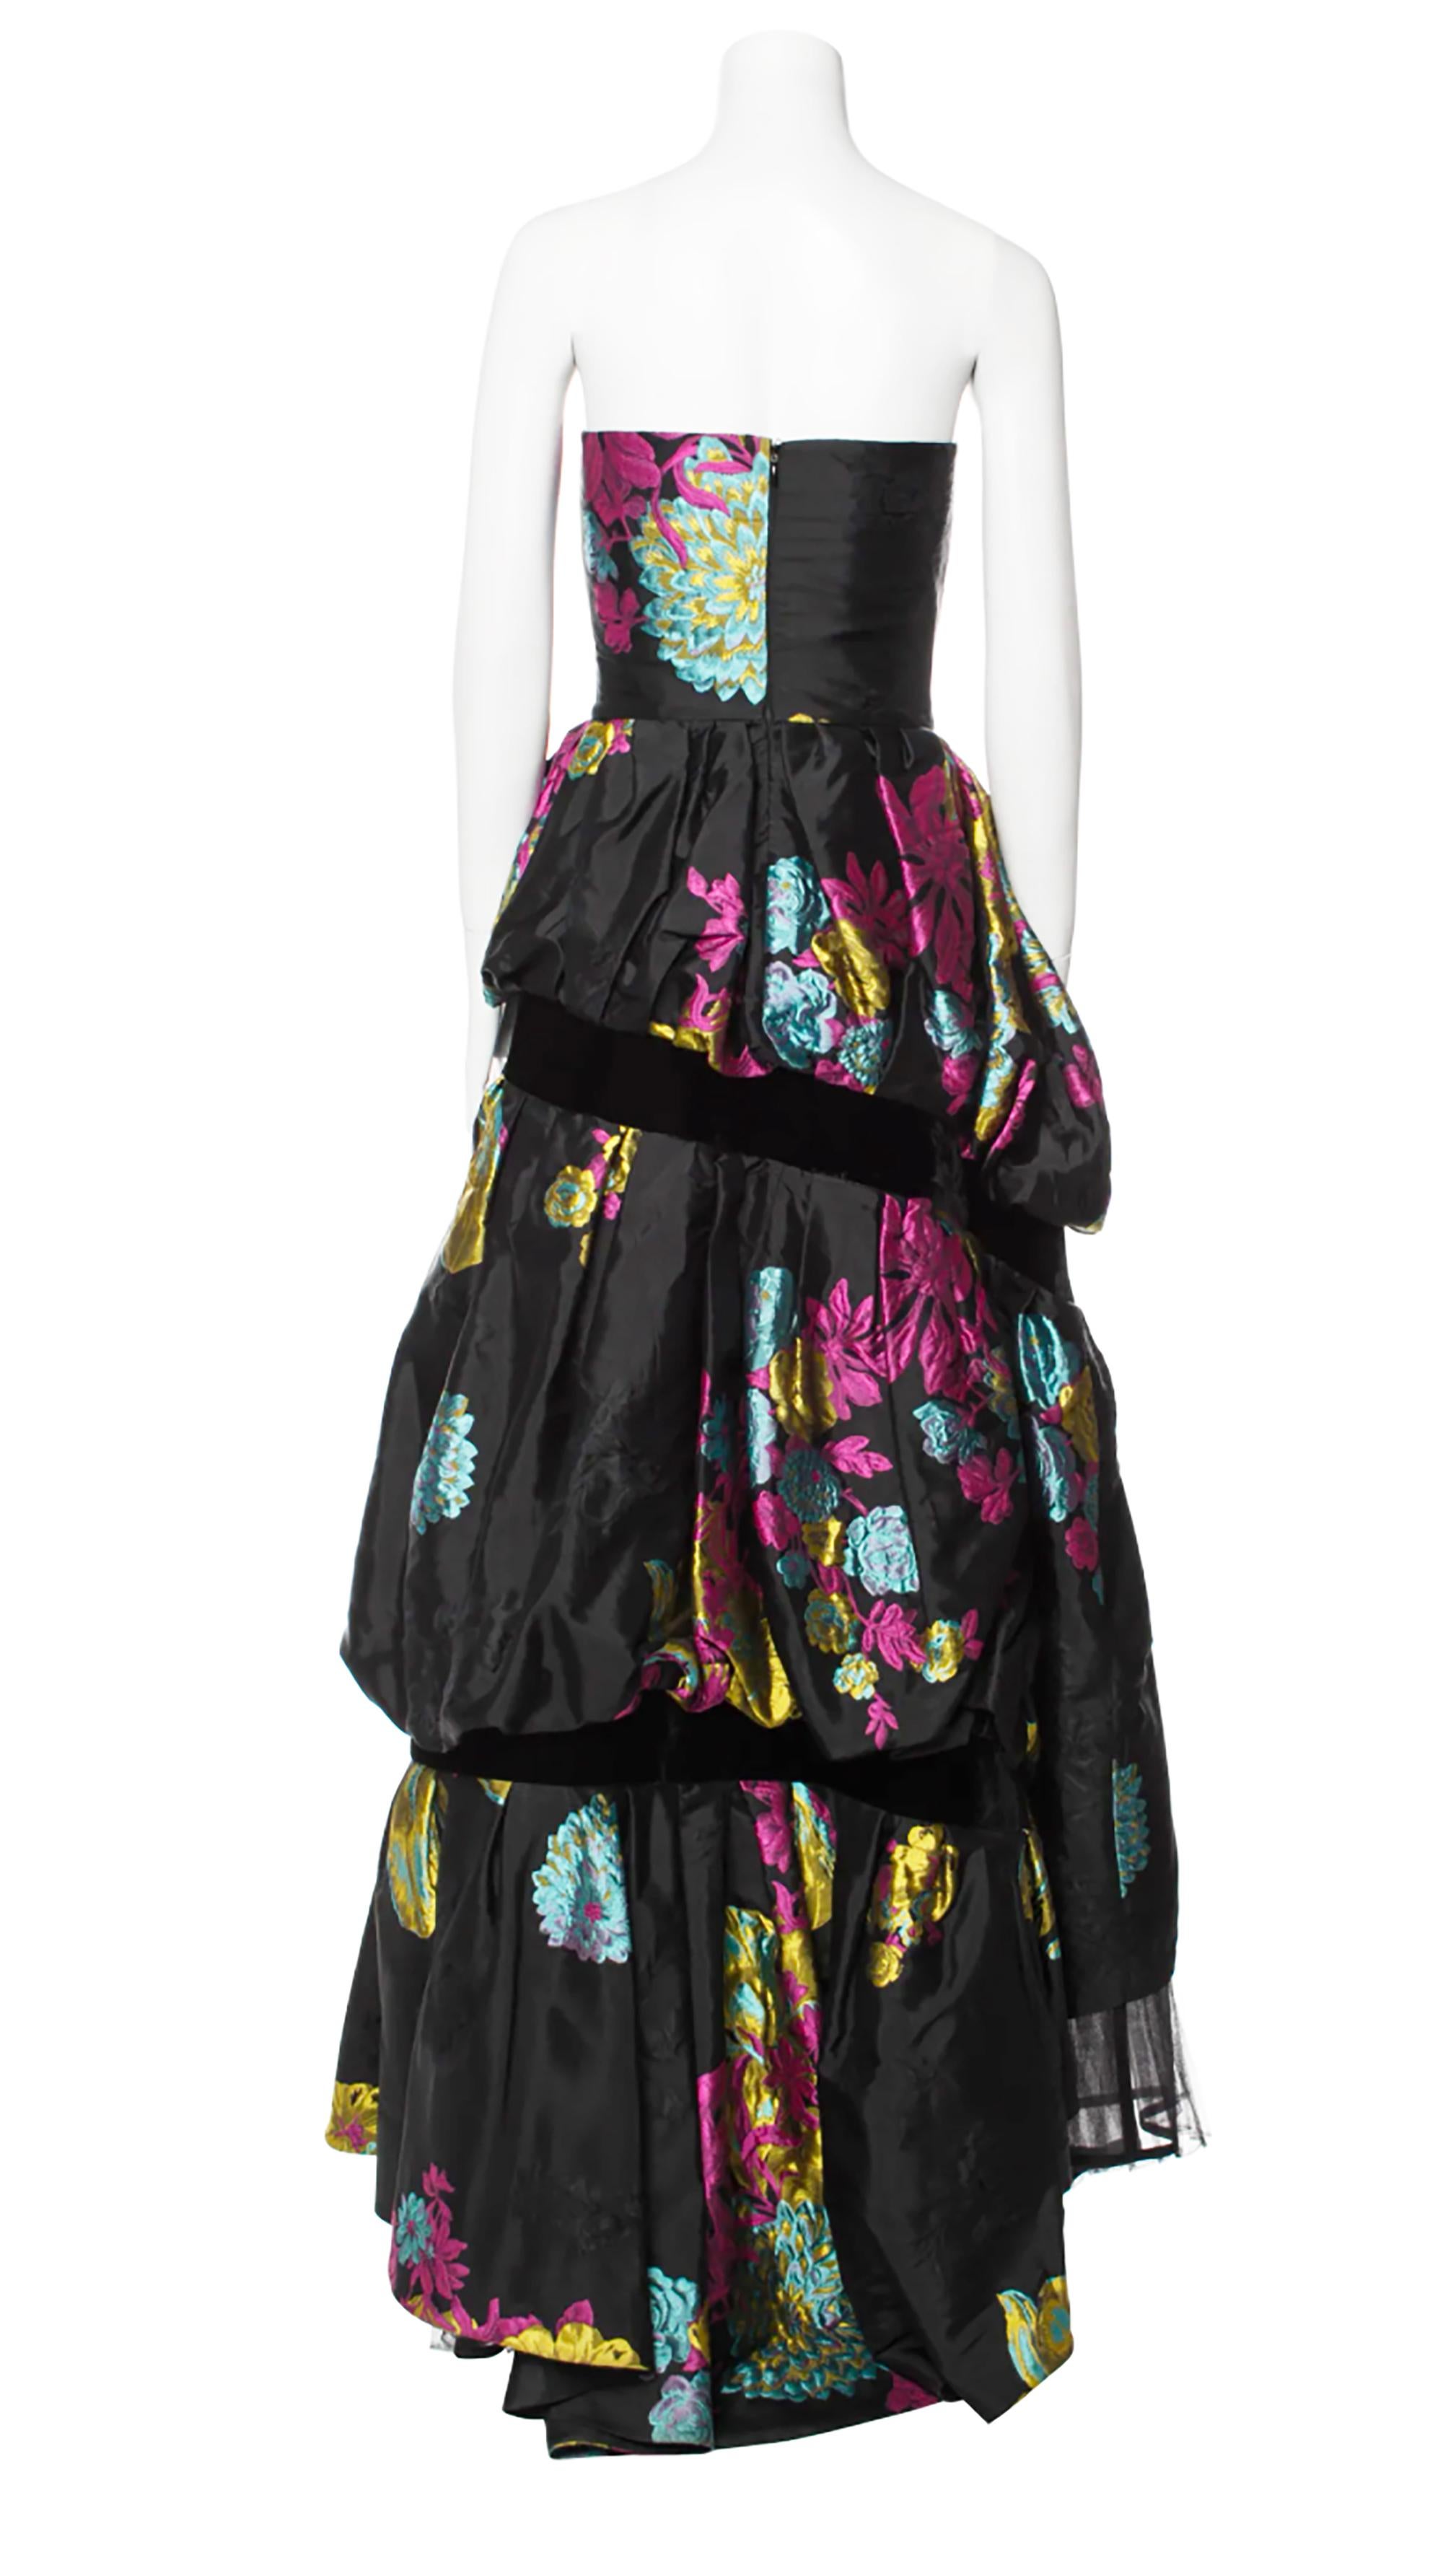 Fall/Winter 1999 Collection Christian Lacroix Strapless Evening Gown
Black With Floral Print and Embroidered Accents
Concealed Zip Closure at Back

Fabric: 64% Acetate, 23% Silk, 13% Wool

Condition: Excellent

Bust: 30.5